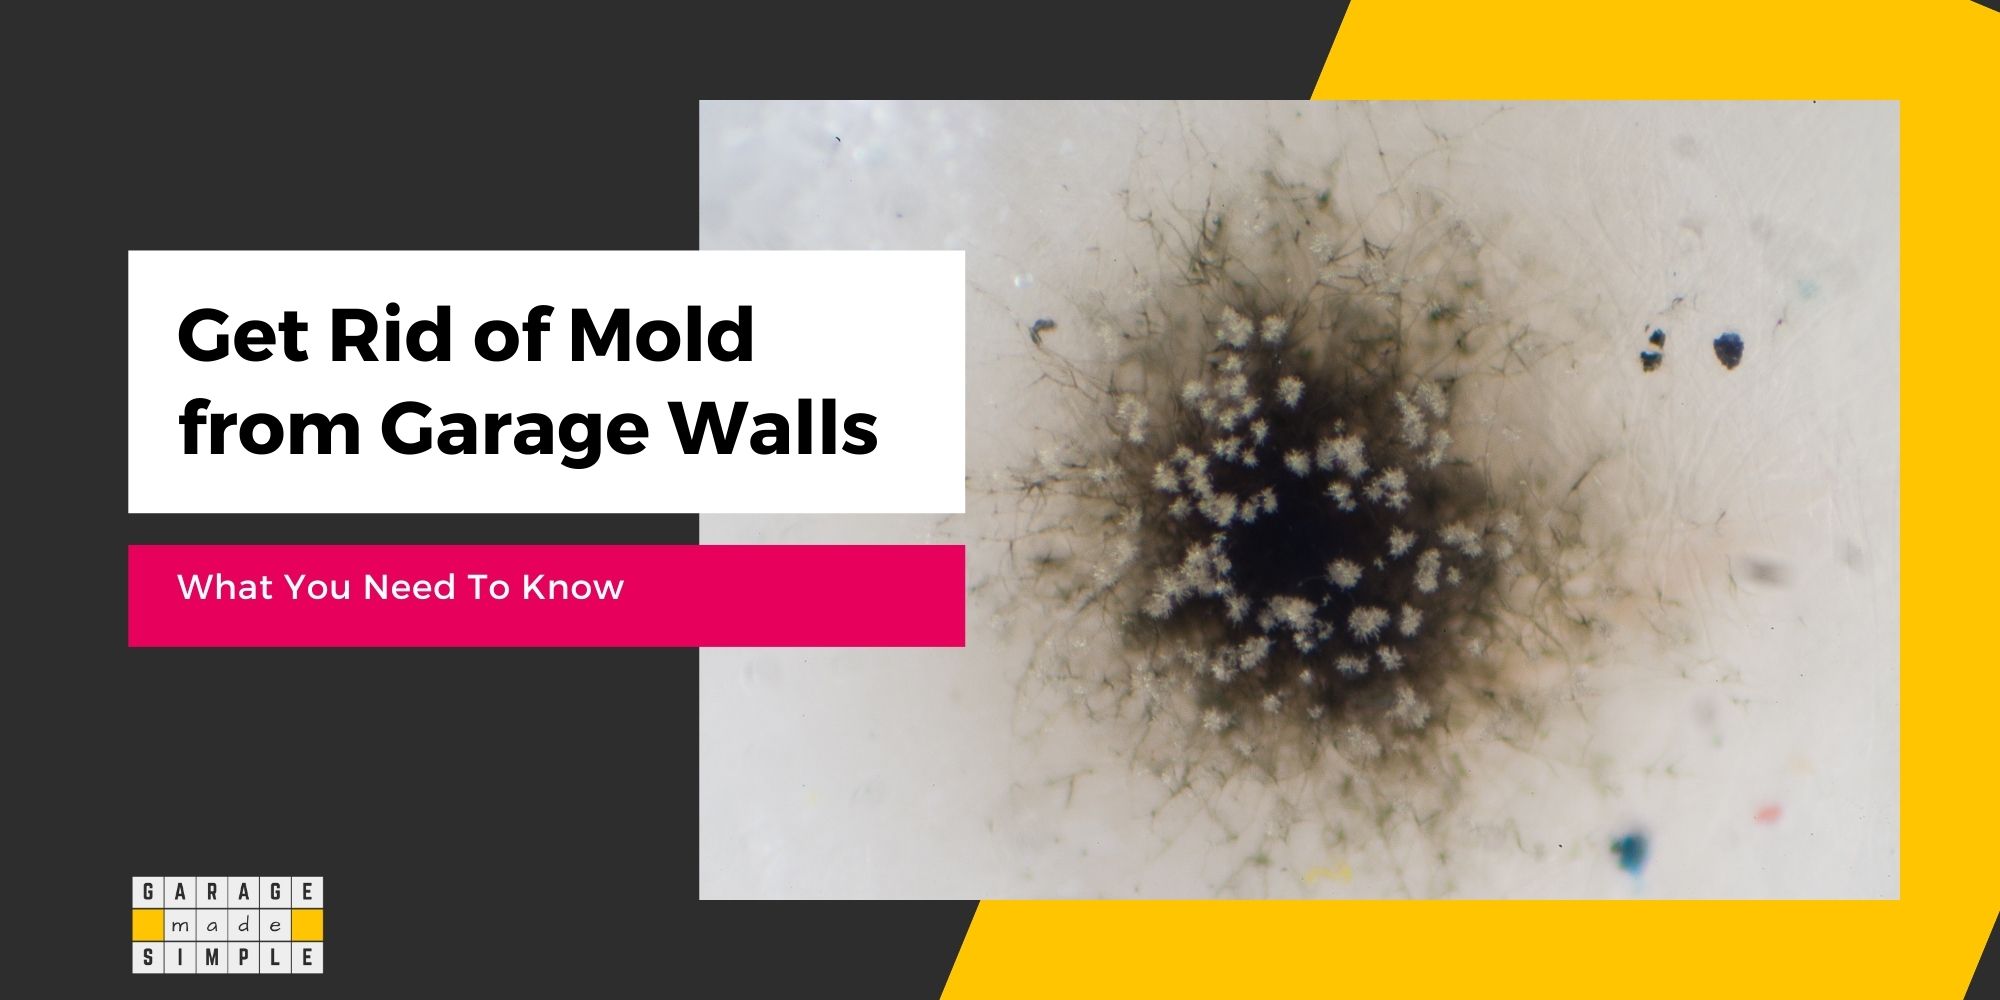 How To Get Rid Of Mold From Garage Walls? A Comprehensive Guide